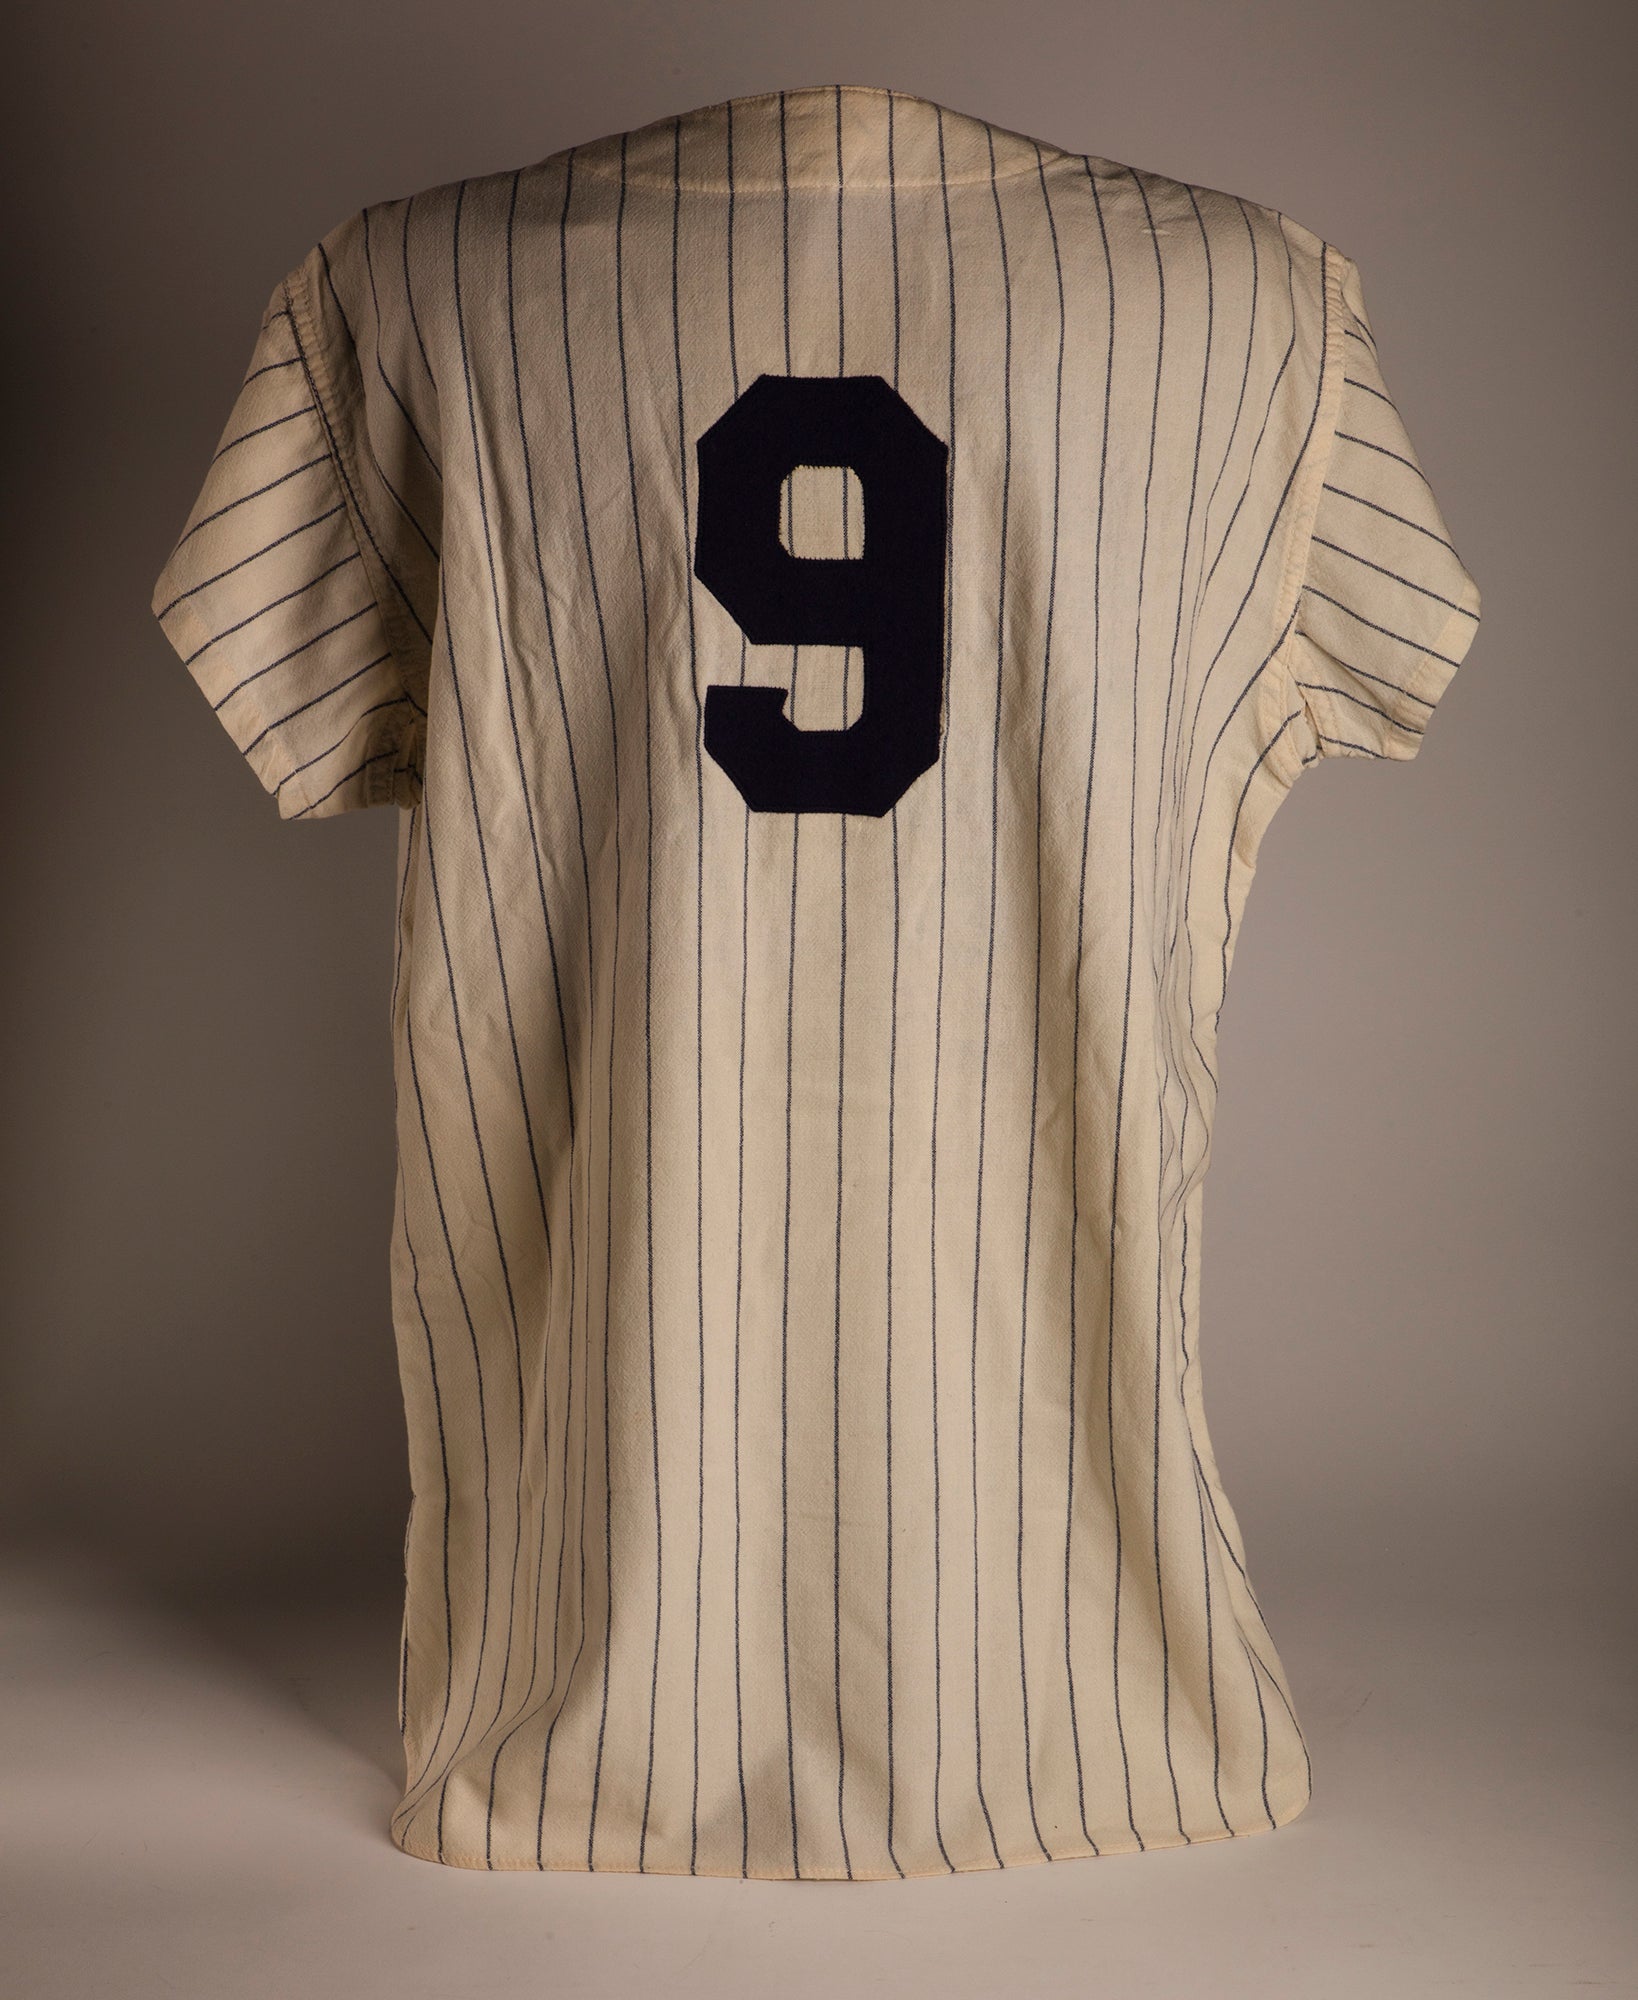 Maris jersey from historic 1961 season lands in Cooperstown